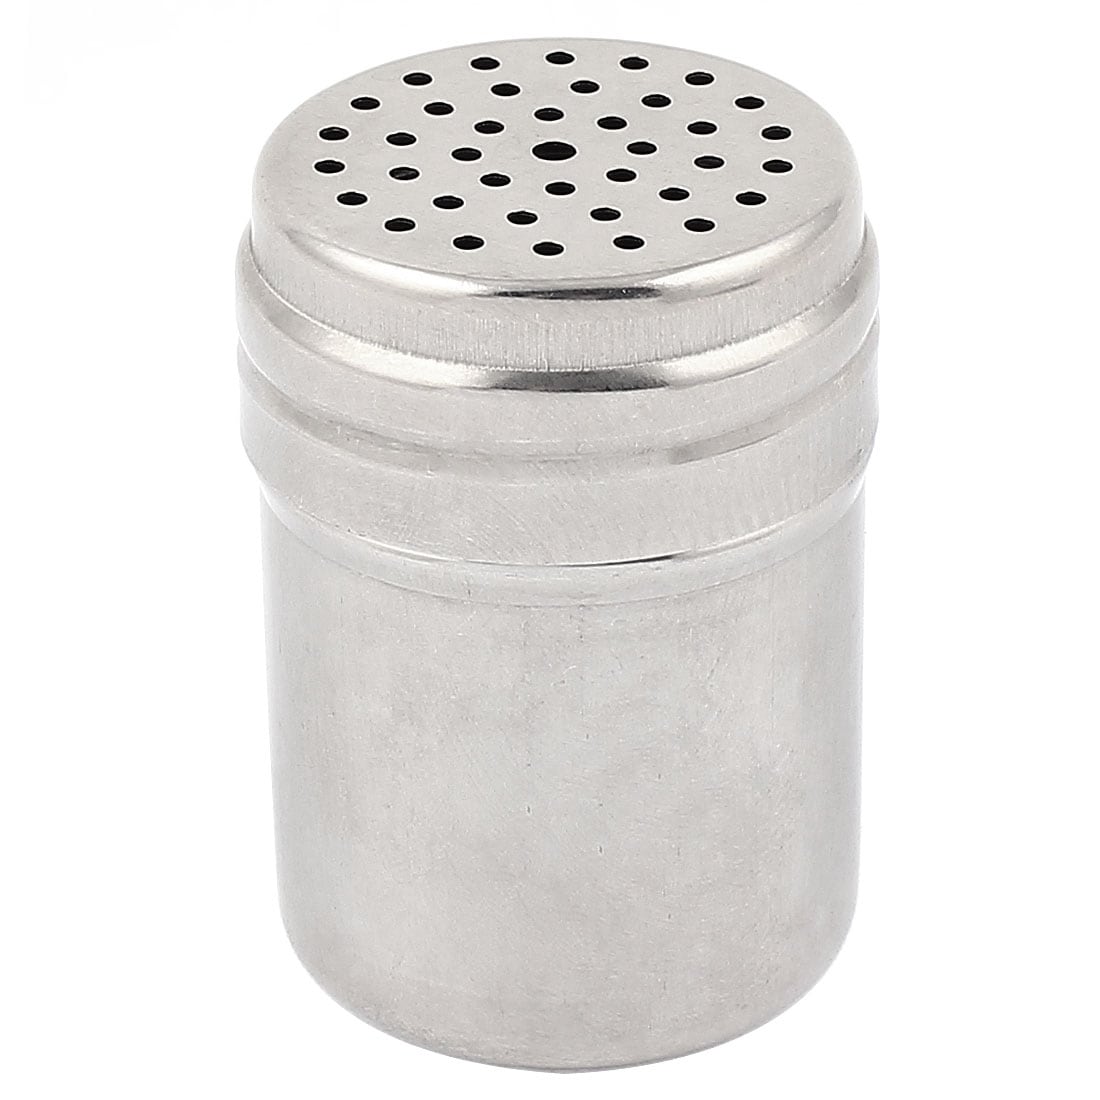 https://ak1.ostkcdn.com/images/products/is/images/direct/1a502e96f29f76ecaf118cbdeff84bf1df9586fd/Stainless-Steel-Cylindrical-Toothpick-Holder-Container-Box-Dispenser.jpg